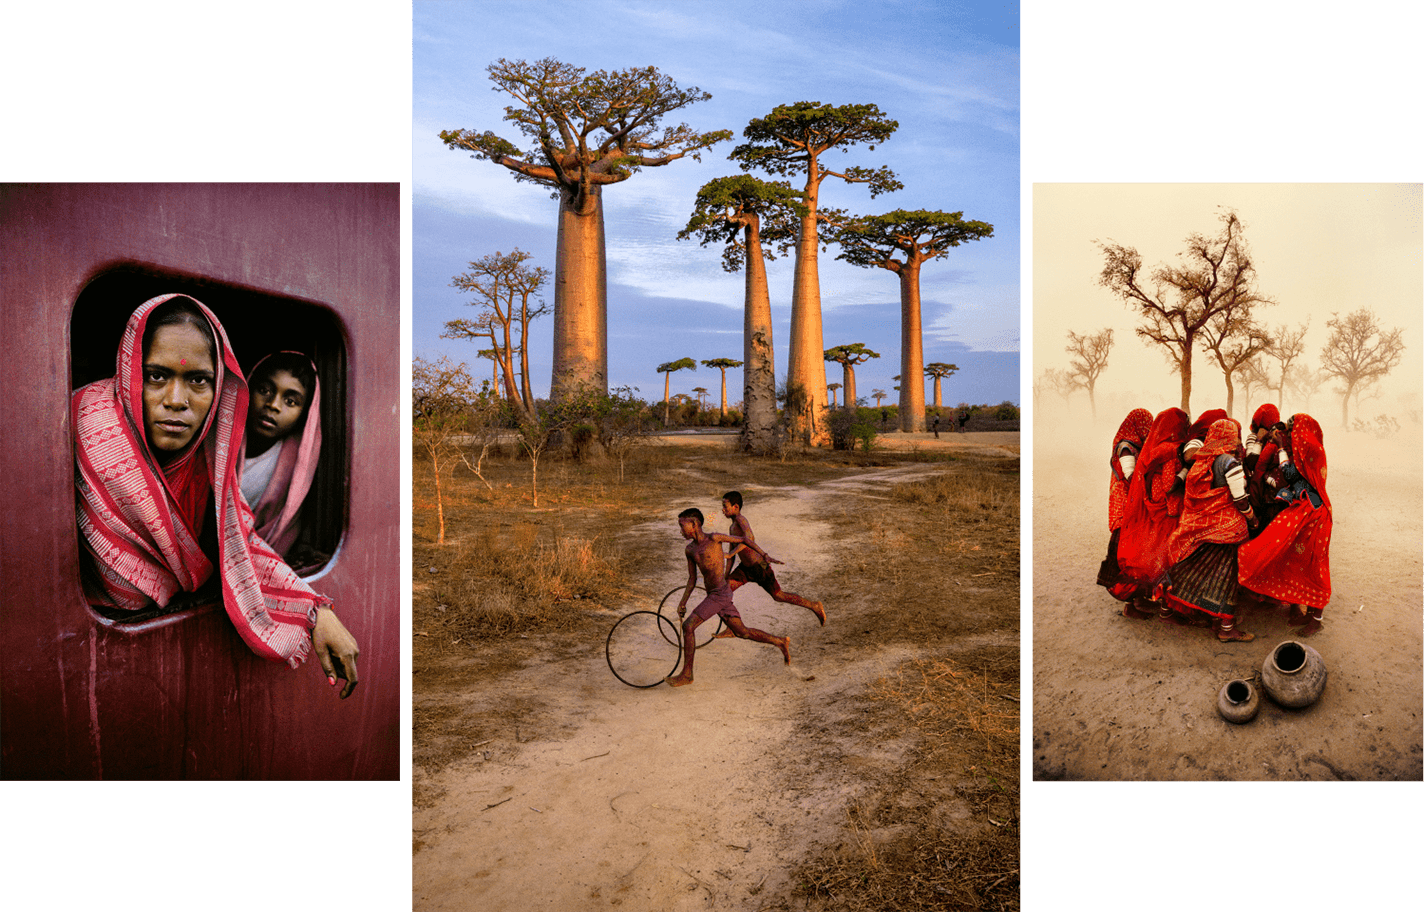 AN EXTRAORDINARY PHOTOGRAPHY EXHIBITION - Steve McCurry ICONS in Melbourne: A Photography Exhibition